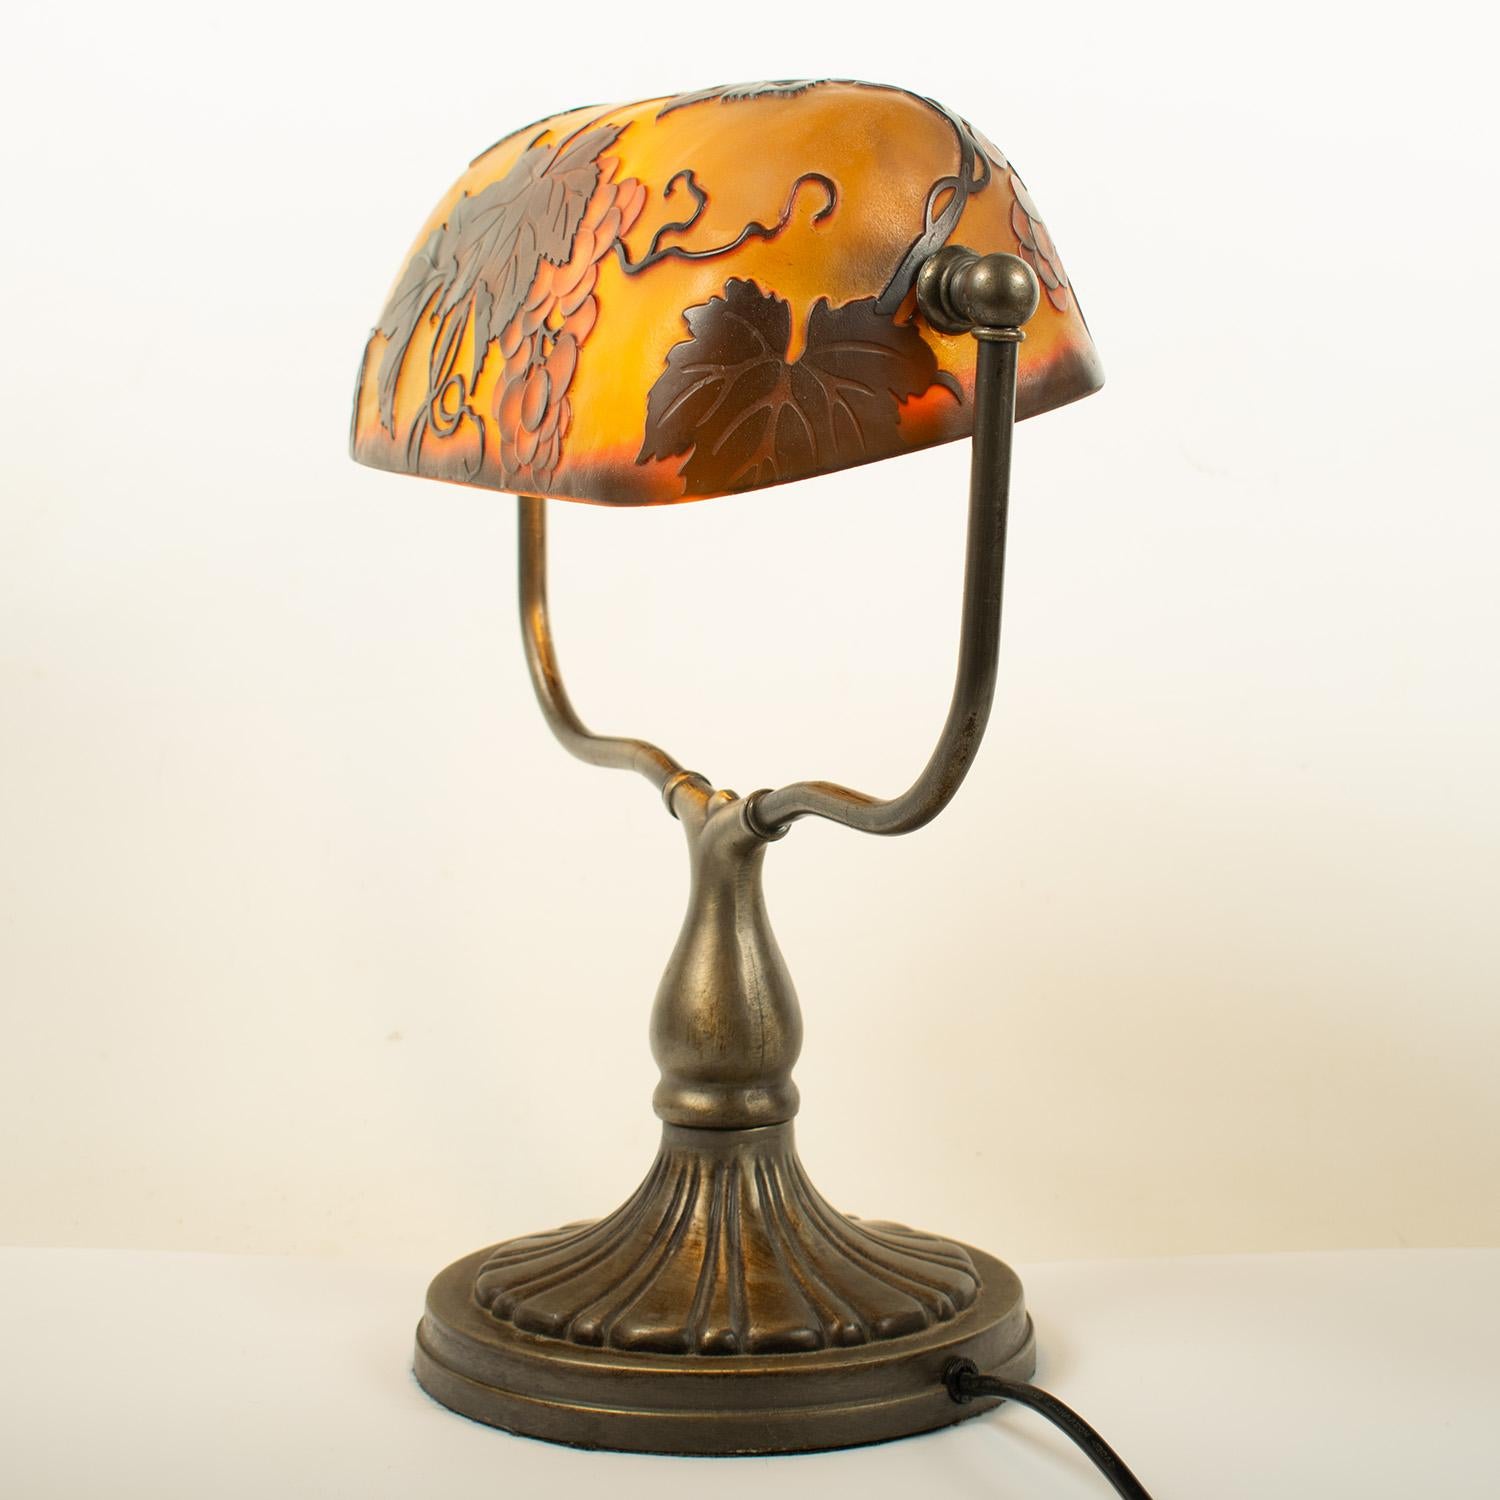 Art Nouveau Desk lamp in the style of Emile GALLE, multilayer glass lampshade with acid-etched decoration of vine branches in muted yellow, orange and green tones.

This is a more recent lamp in the Art Nouveau style most probably produced in the